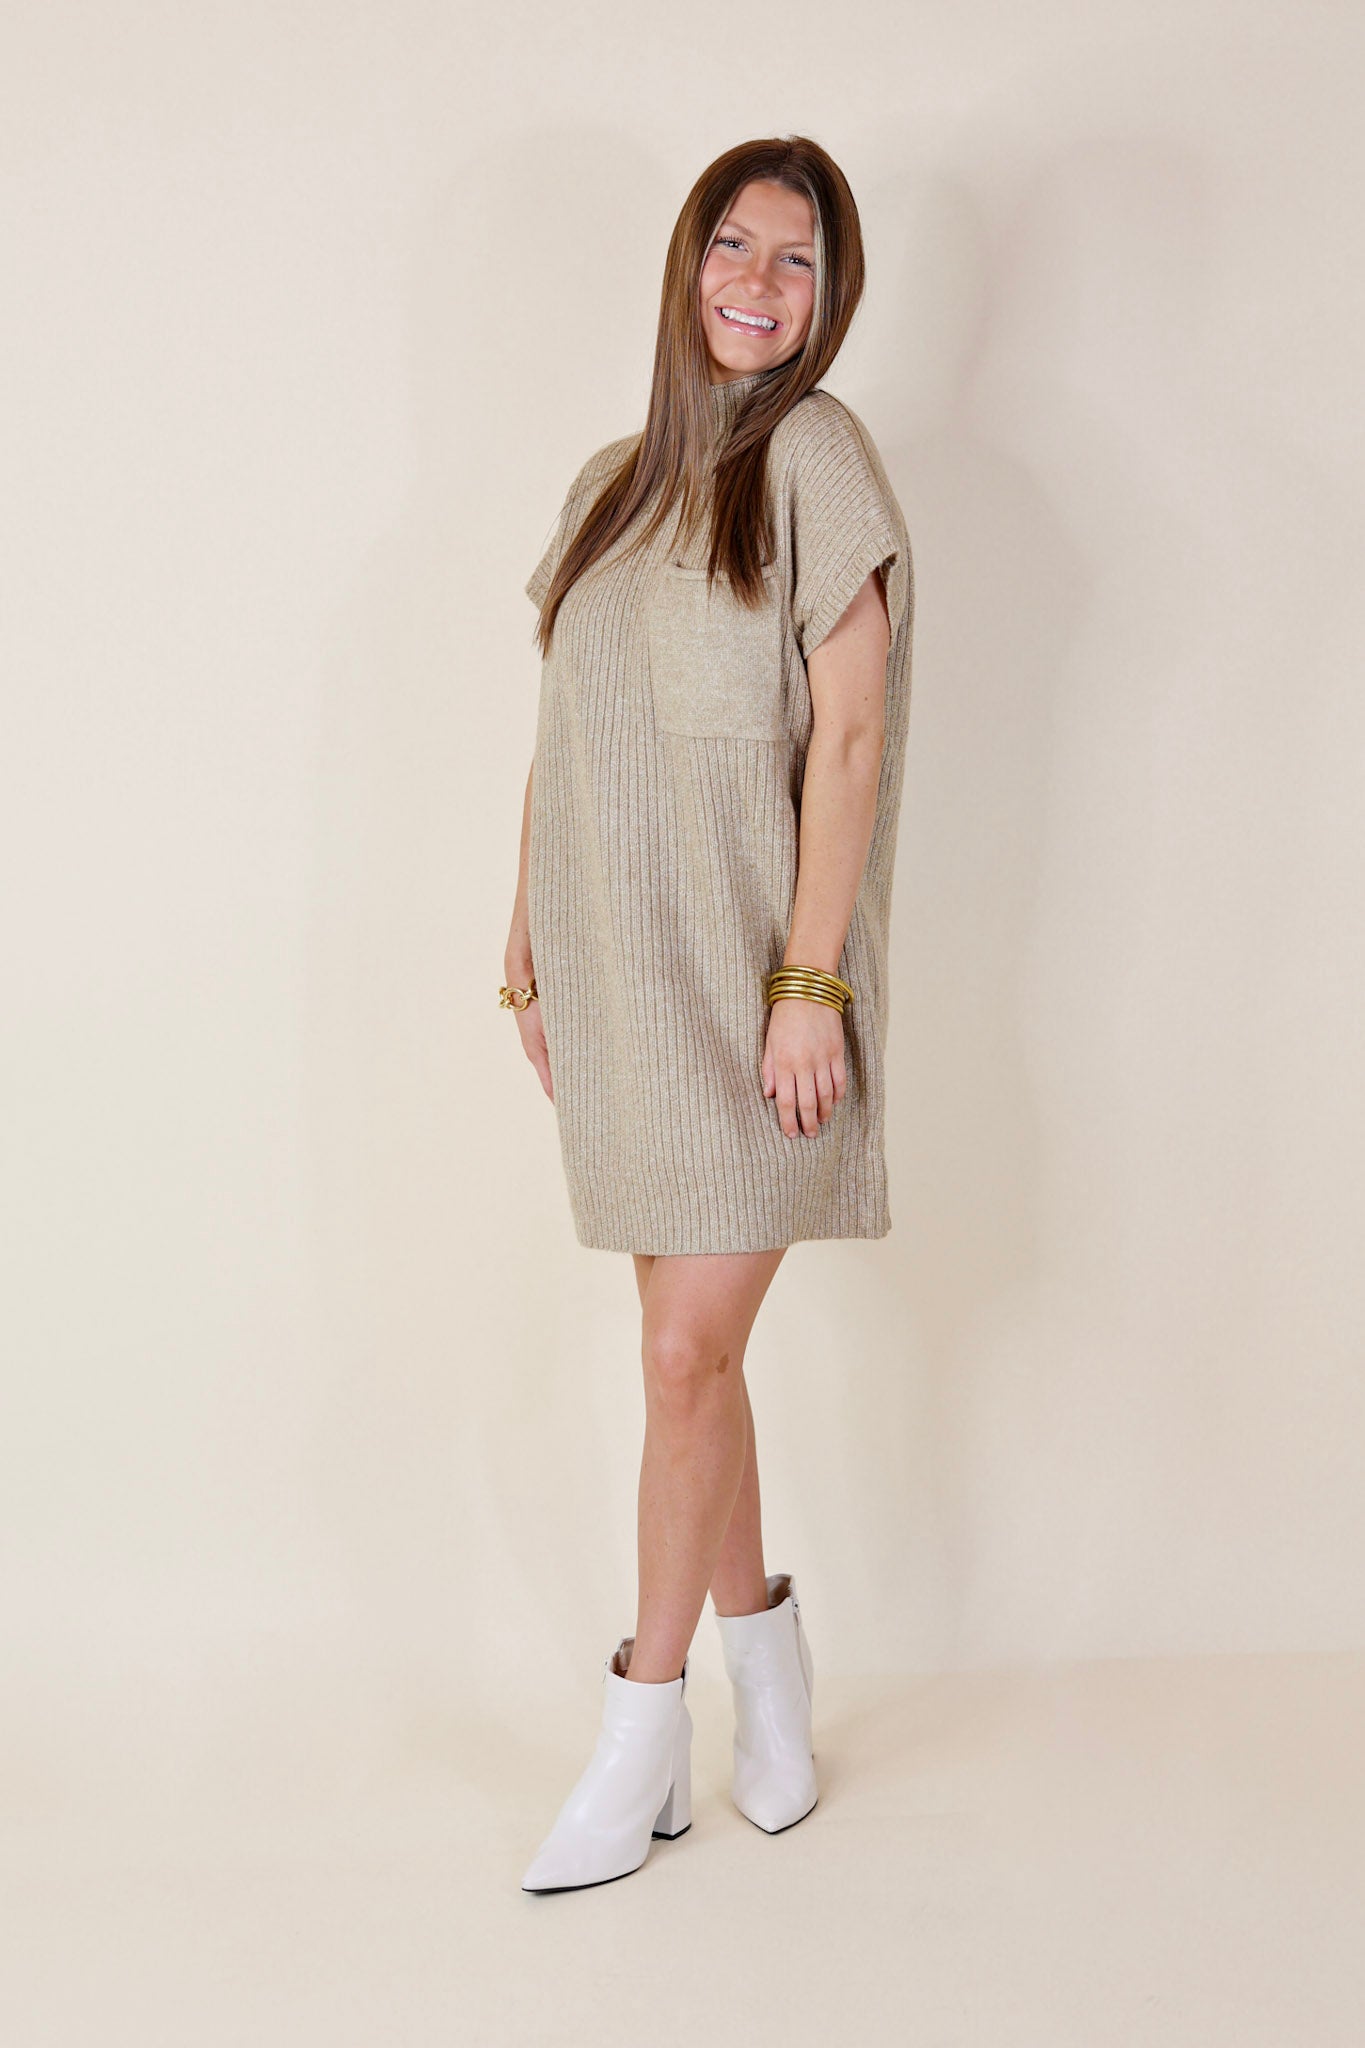 City Sights Cap Sleeve Sweater Dress in Oatmeal Beige - Giddy Up Glamour Boutique